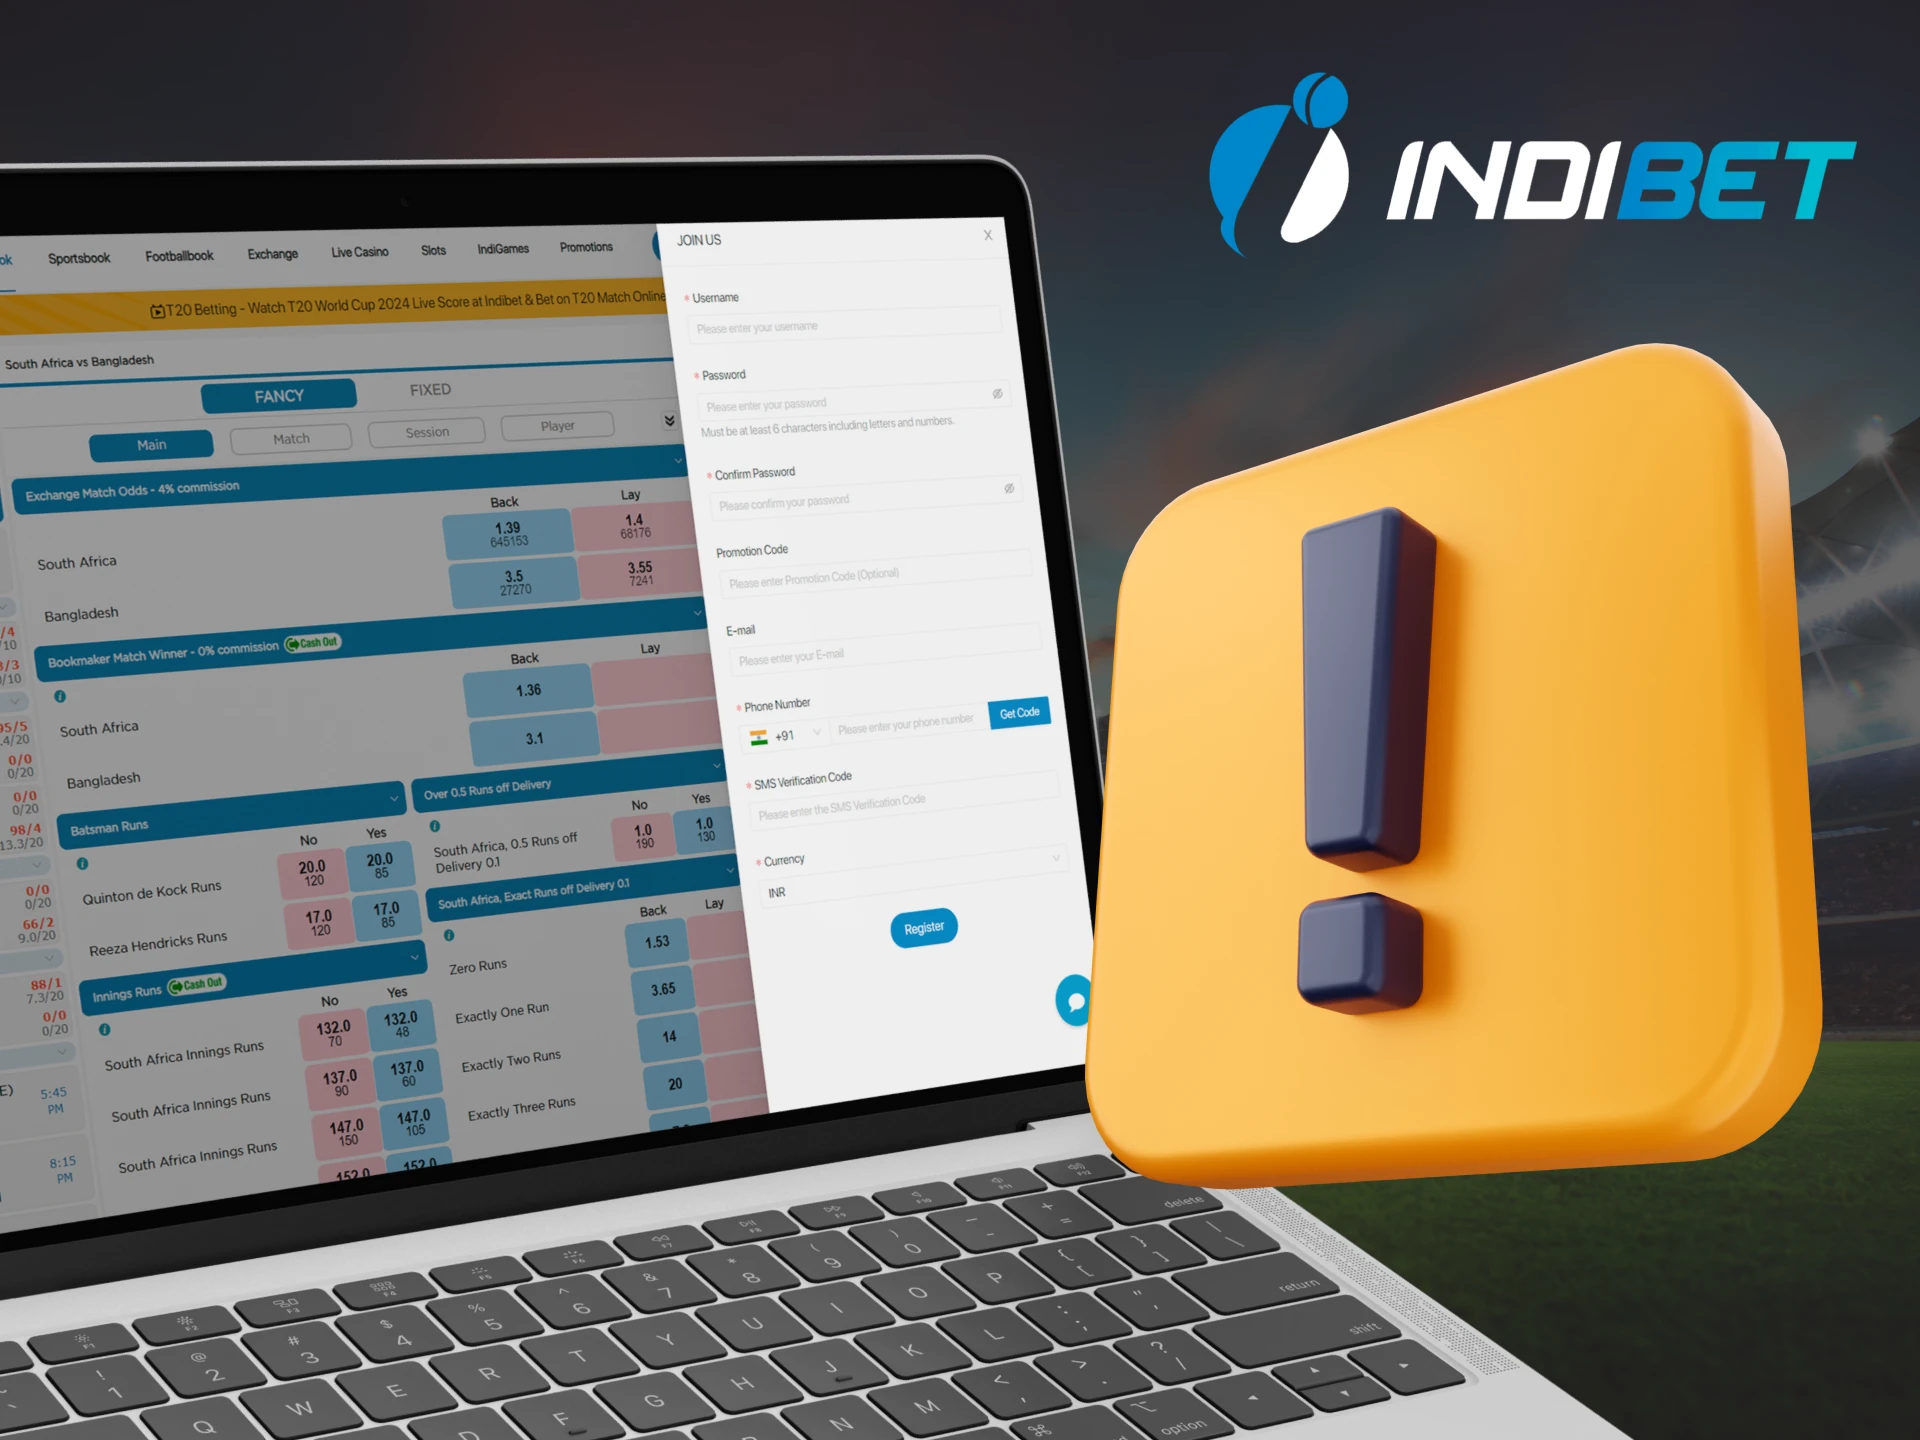 Here are the common problems when registering with Indibet.